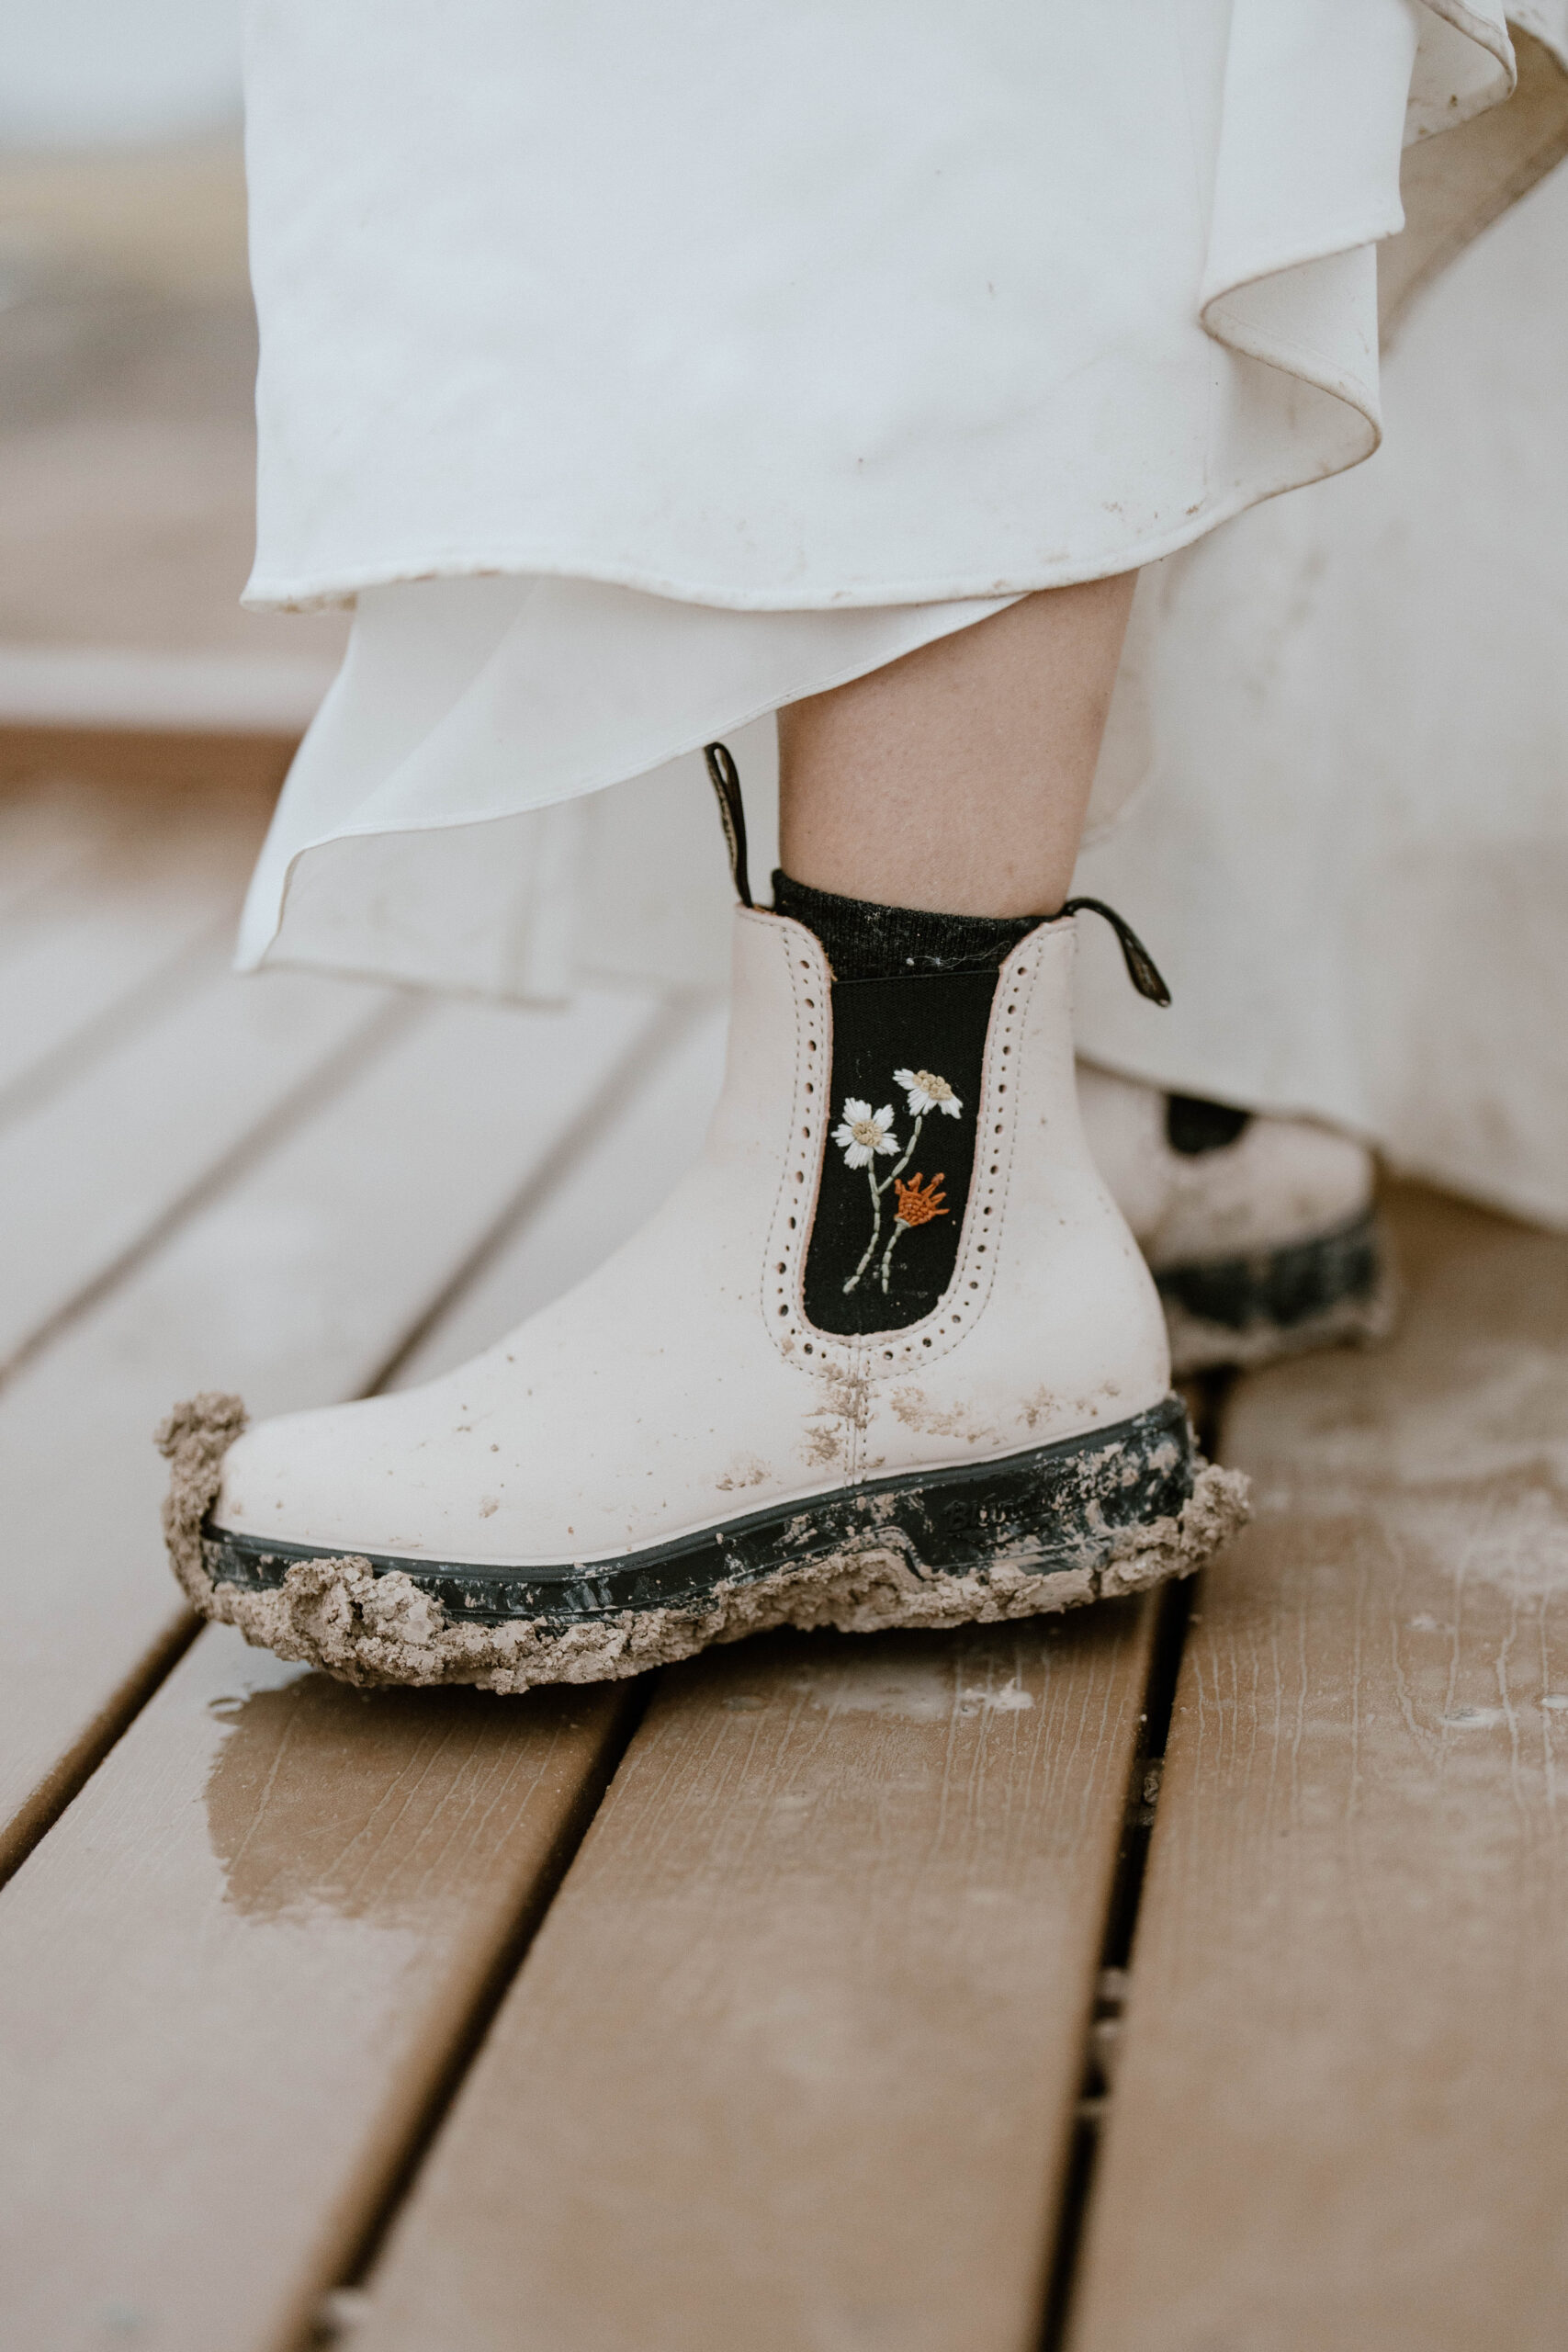 A pair of white women's Blundstones is pictured with embroidered flowers